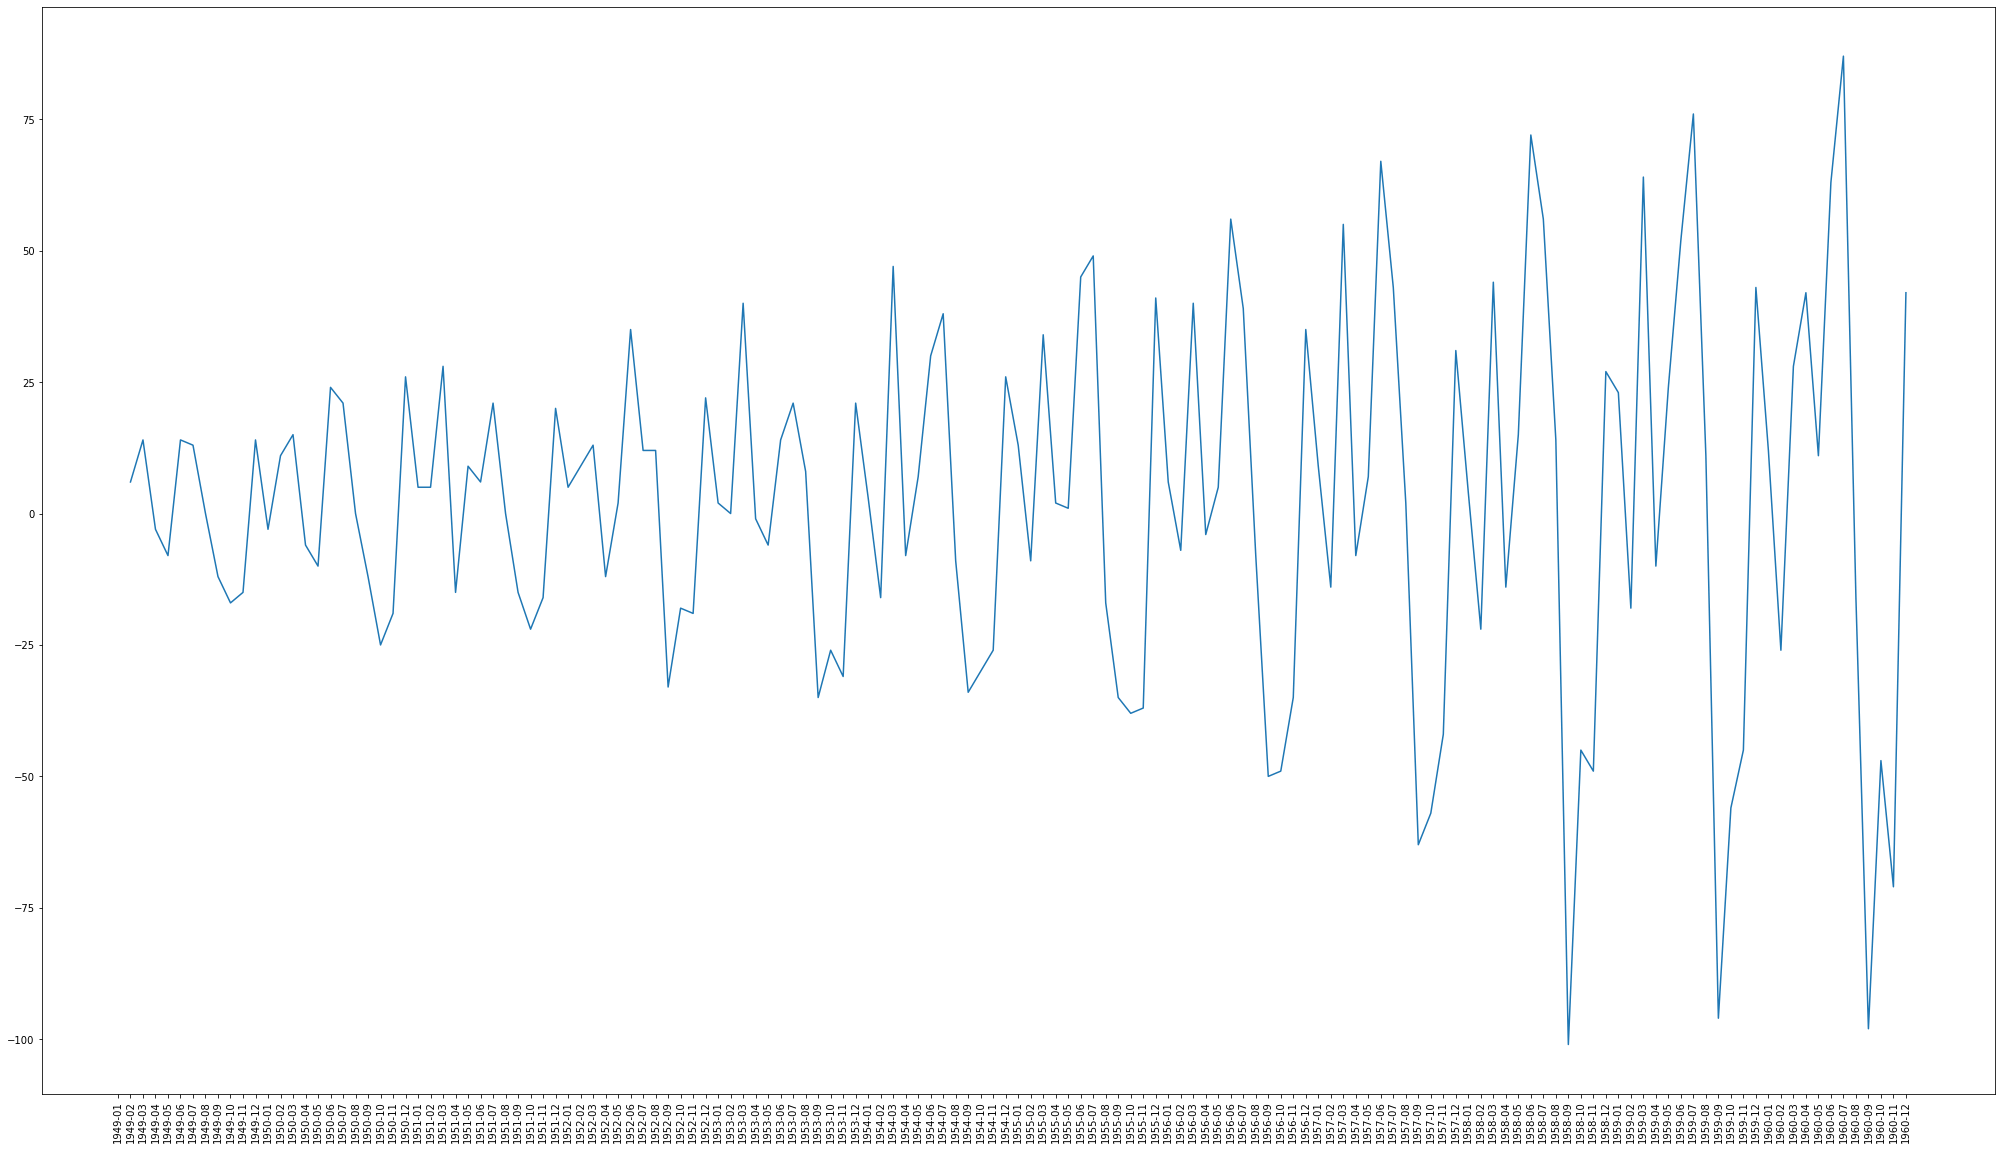 Static time series